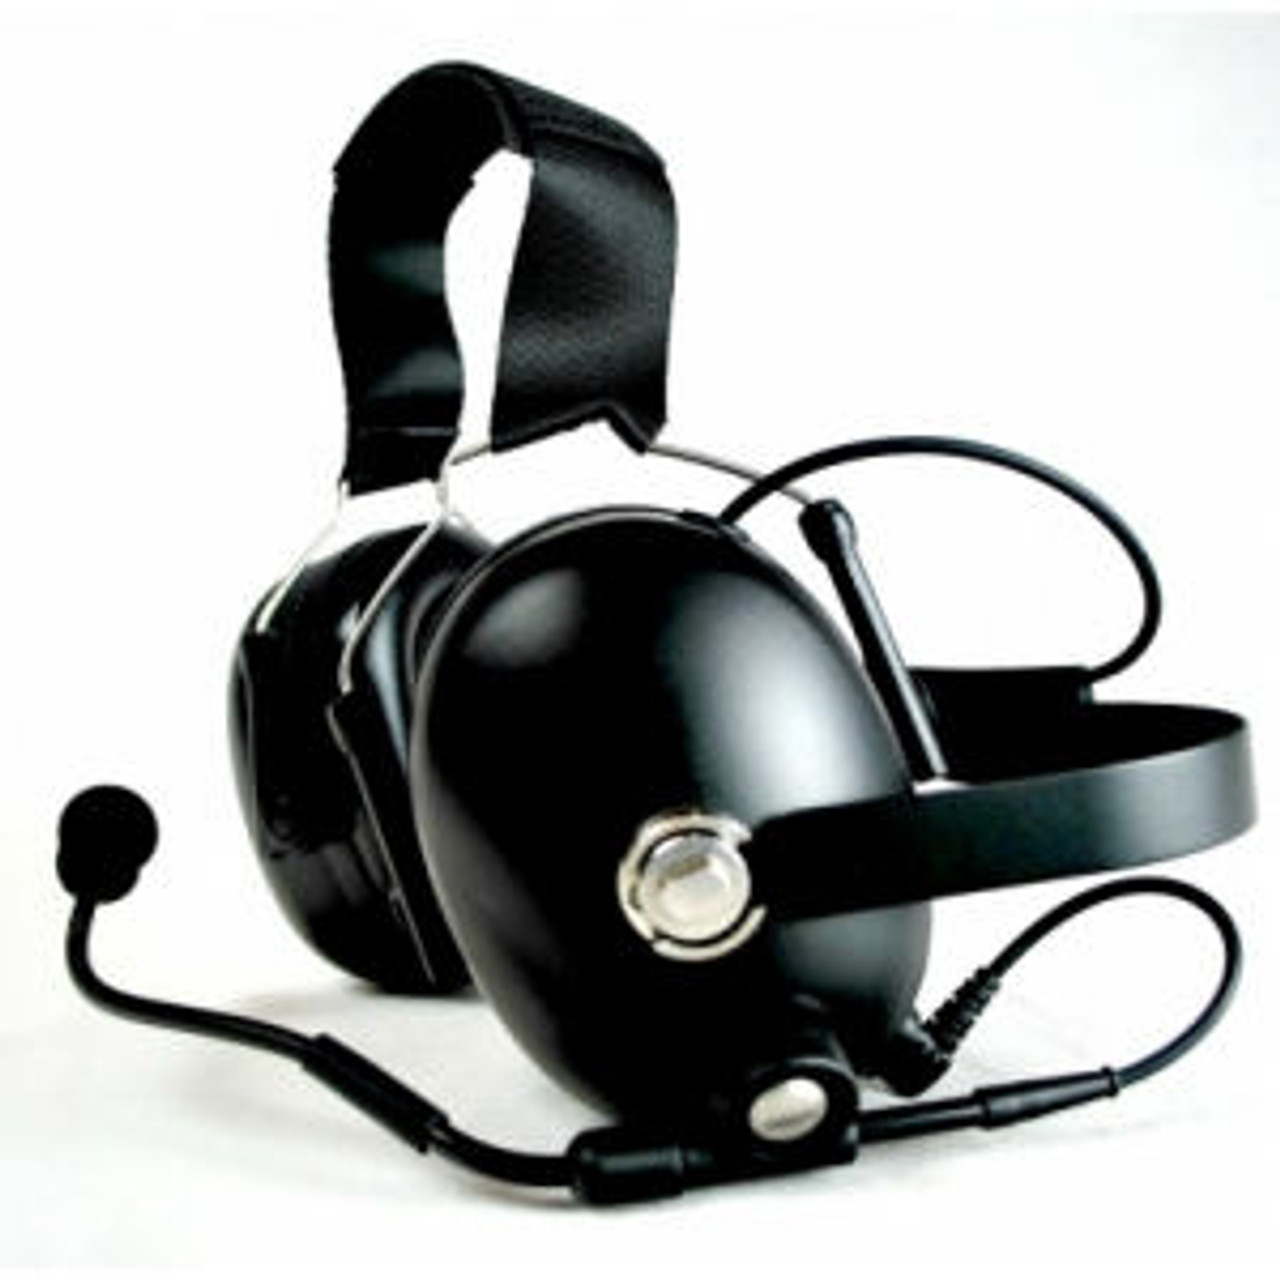 M/A-Com P5350 Noise Canceling Double Muff Behind The Head Headset